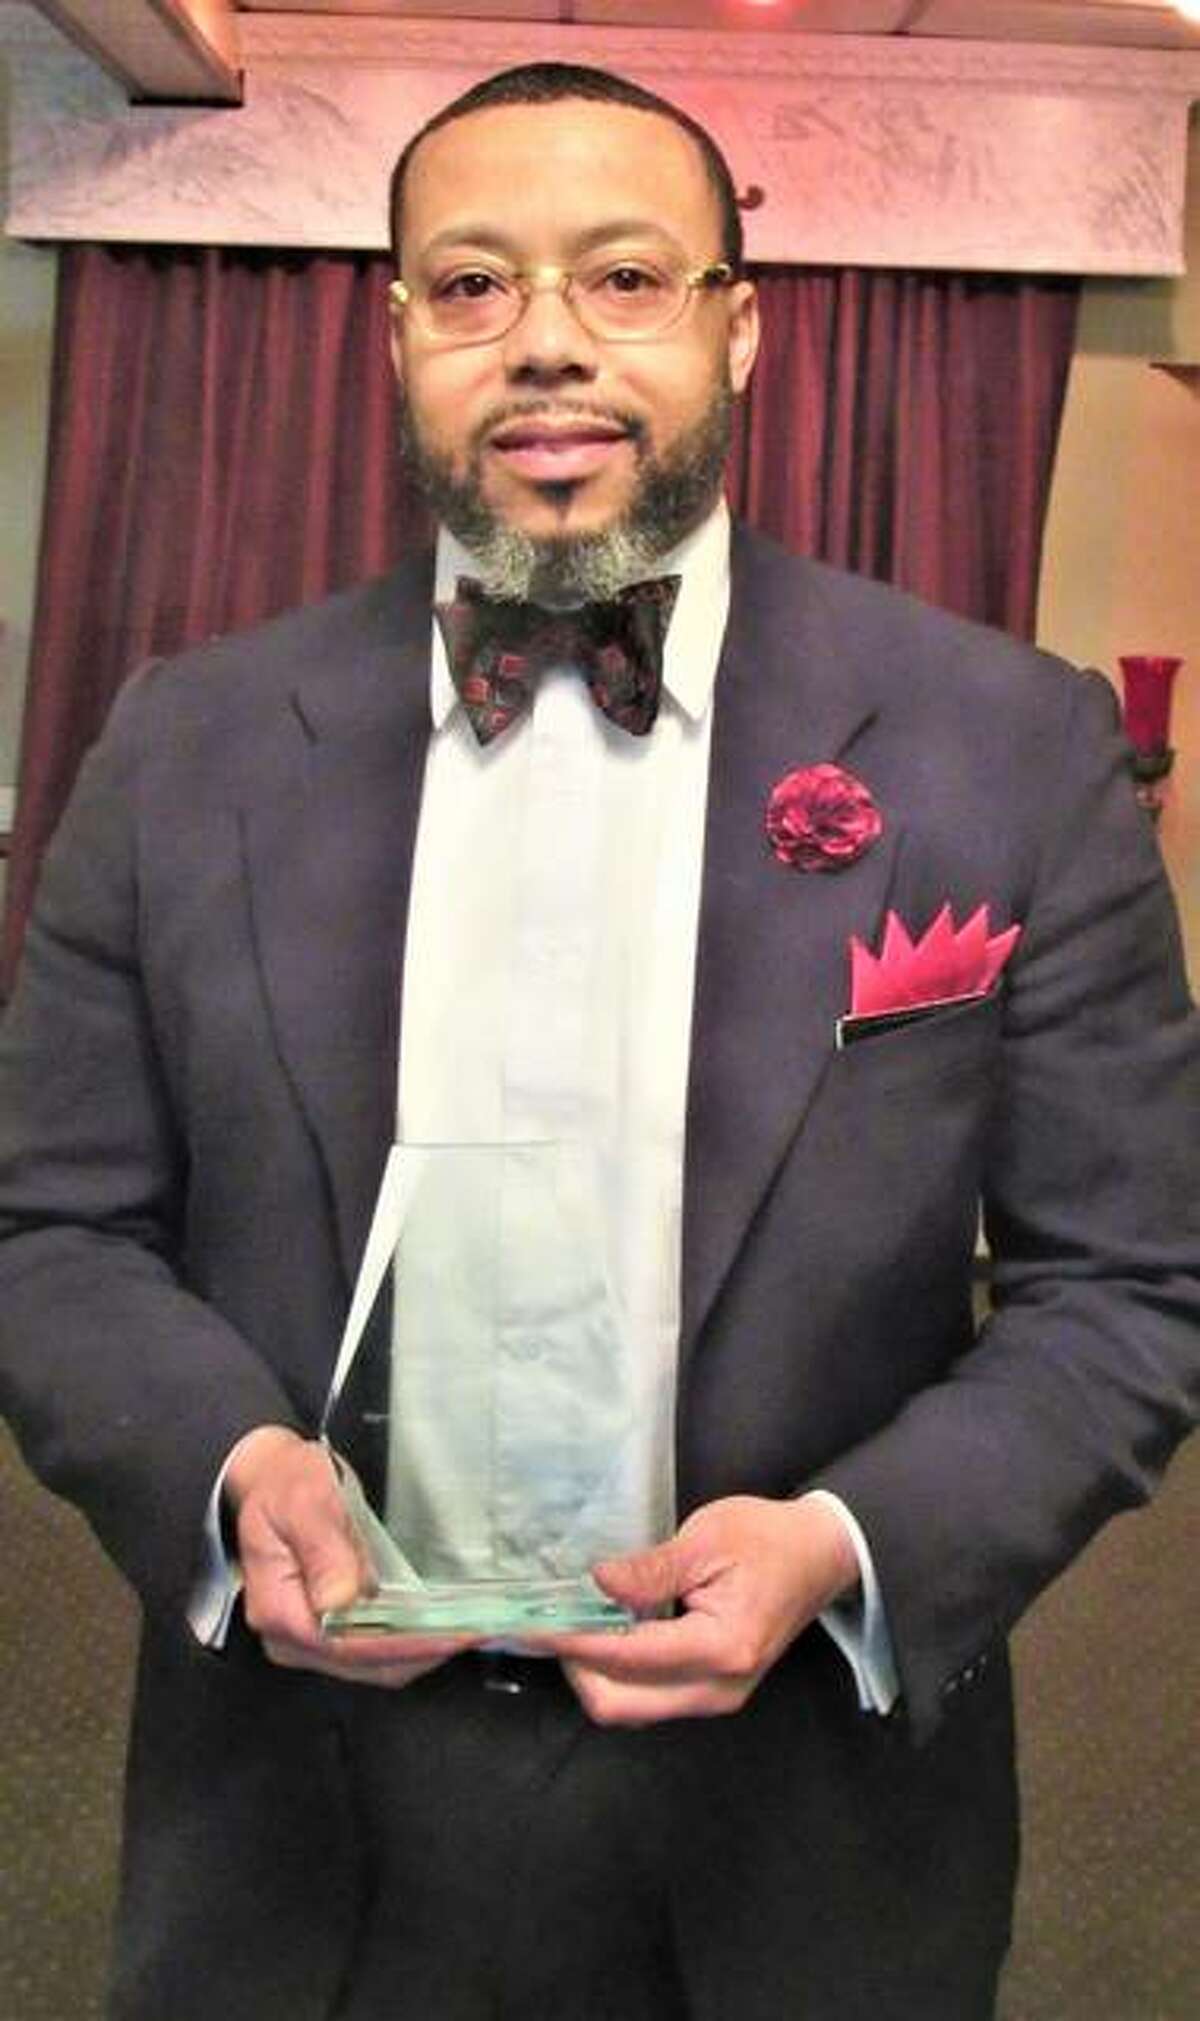 Marcus Harrison of Harrison Funeral Chapel, 1924 Central Ave., Alton, has received the Entrepreneur of the Year Award from the National Funeral Directors and Morticians Association.